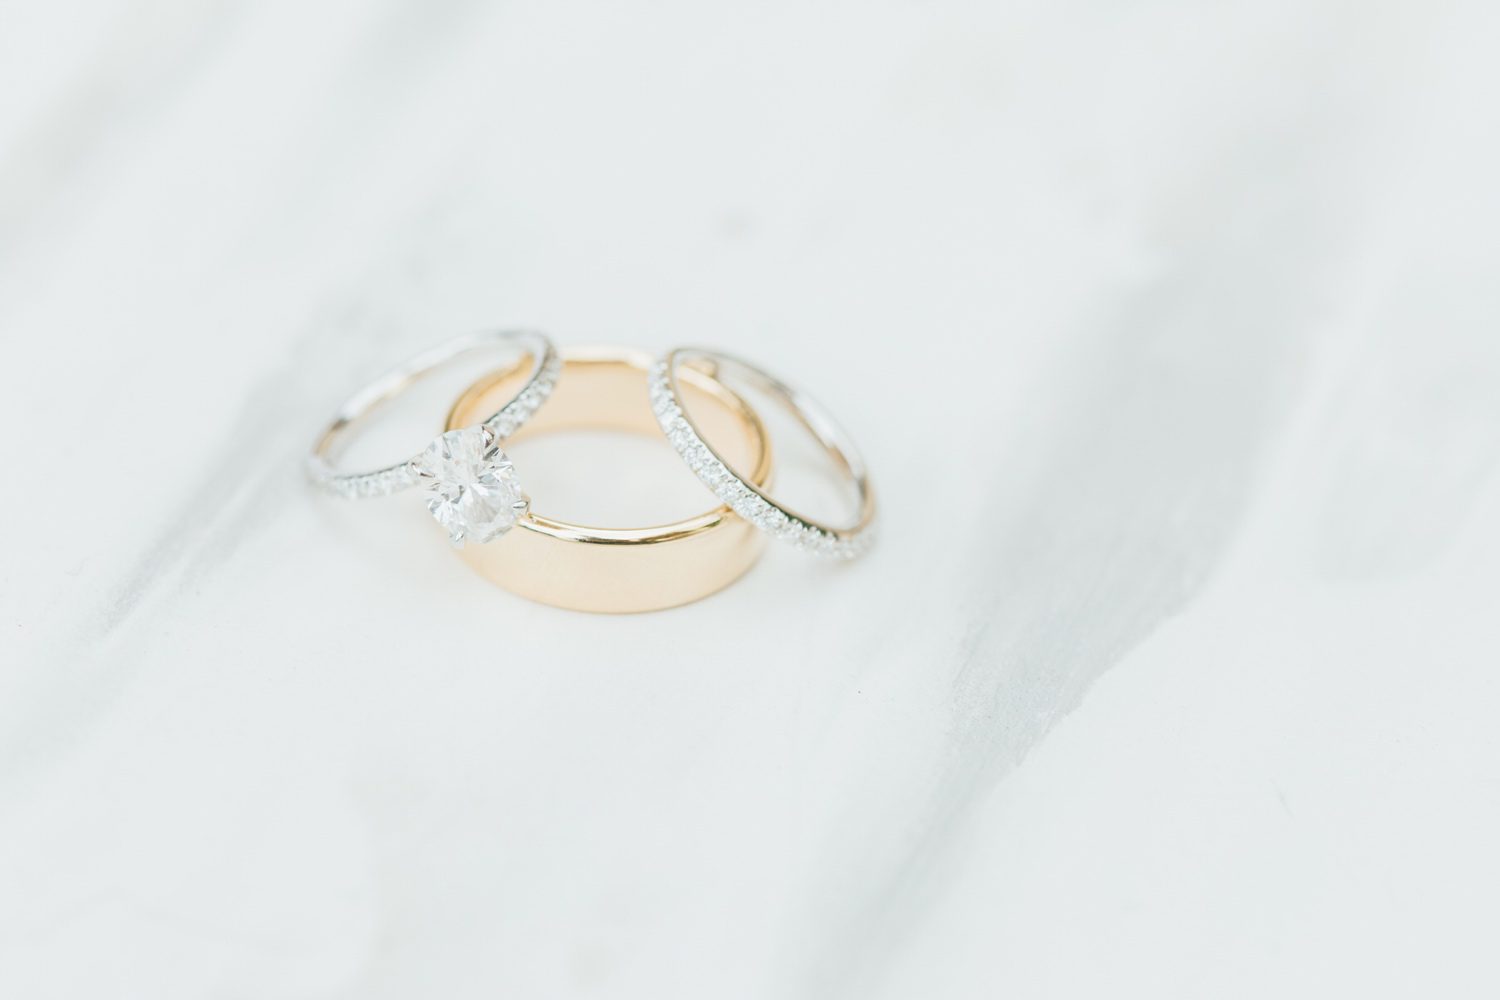 Bride's wedding rings and wedding bands